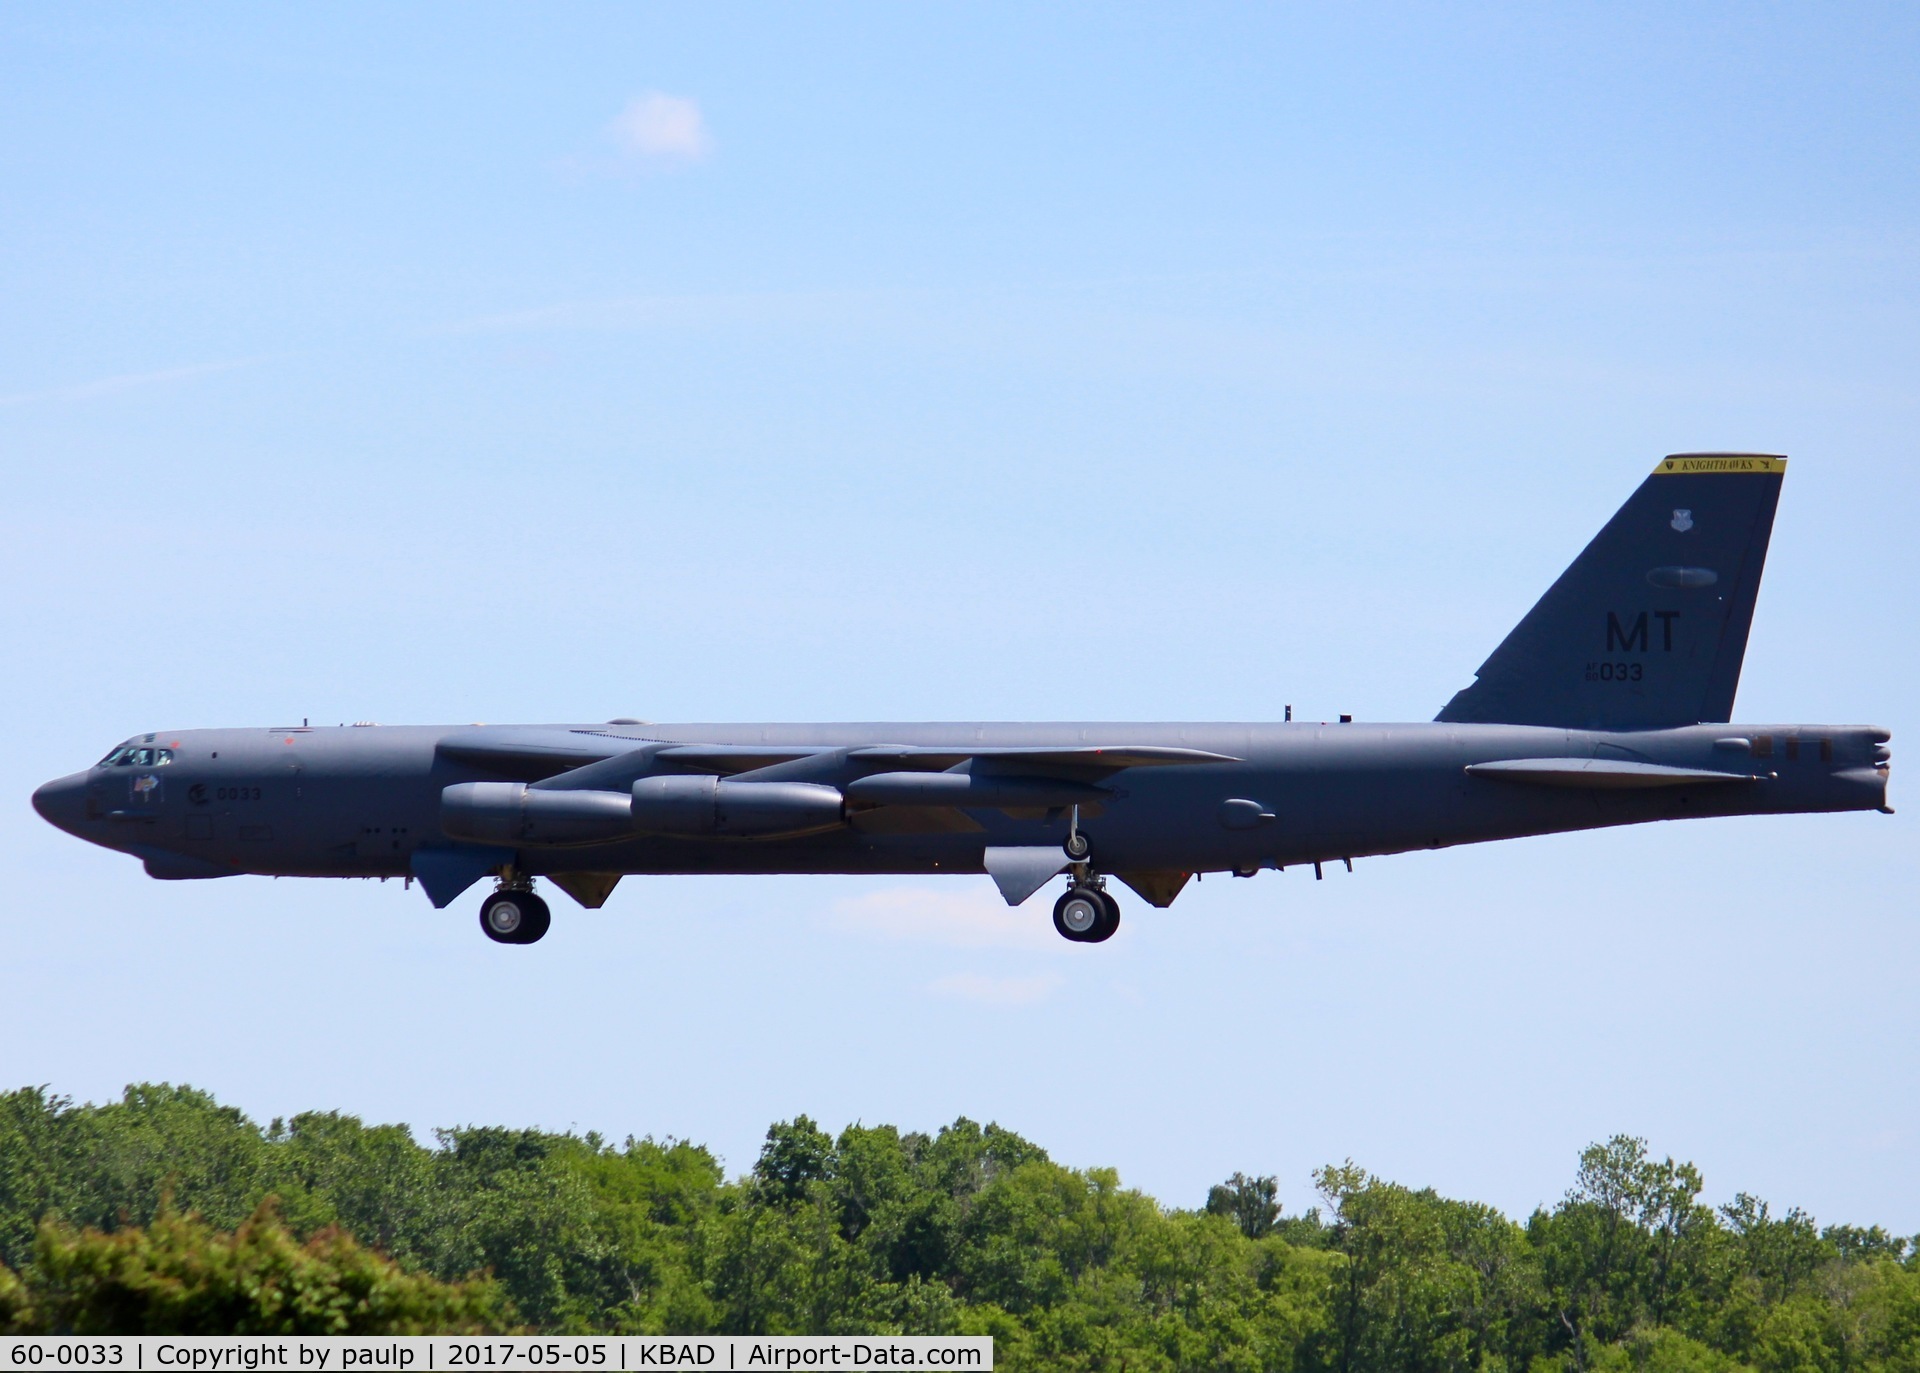 60-0033, 1960 Boeing B-52H Stratofortress C/N 464398, At Barksdale Air Force Base.